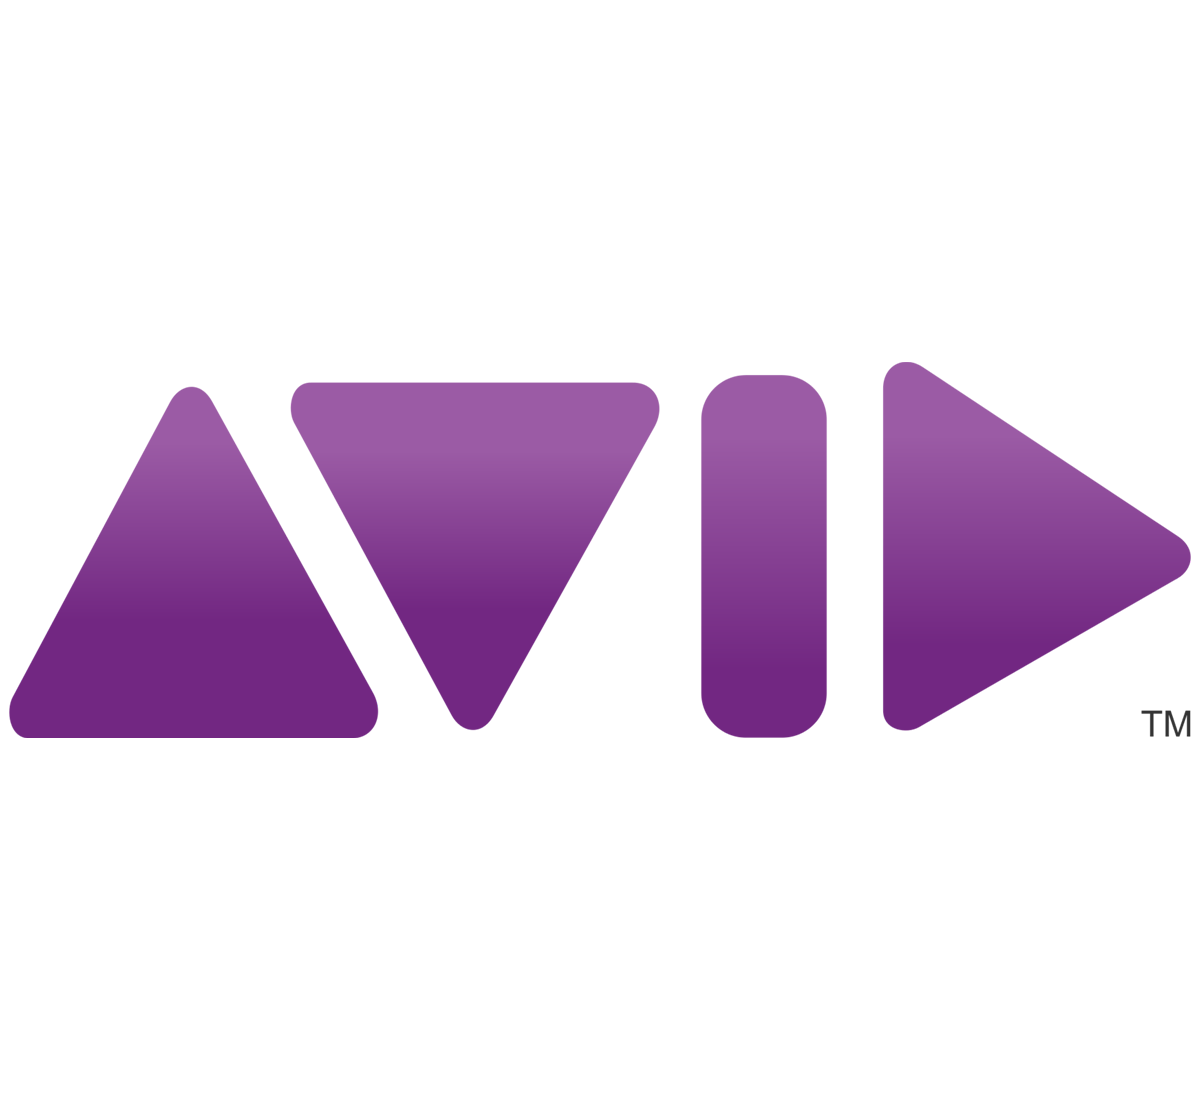 Avid announces updates across its product & service lines